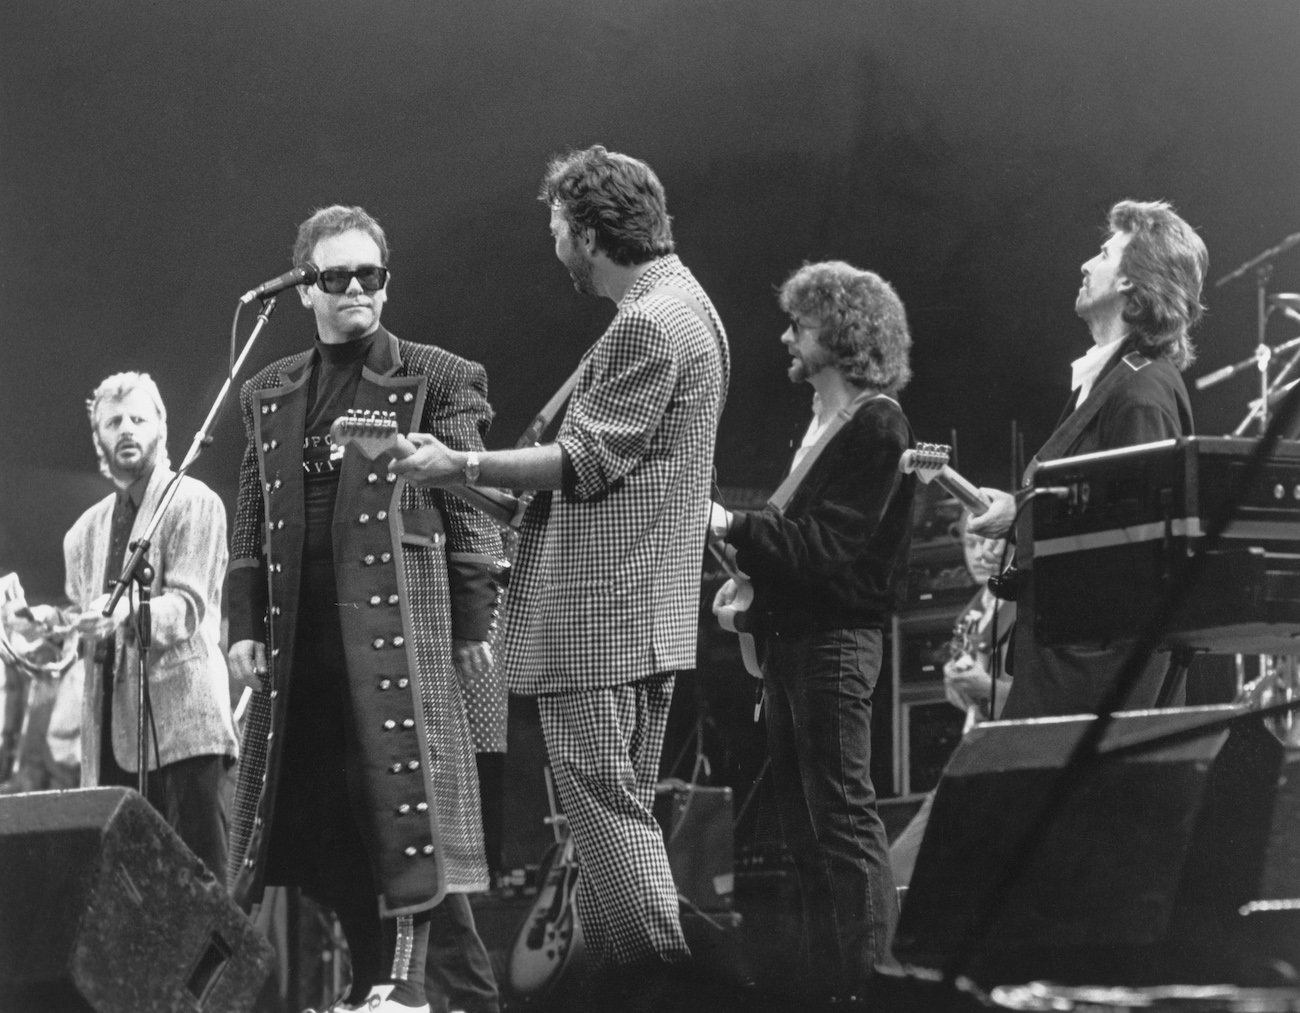 Ringo Starr, Elton John, Eric Clapton, Jeff Lynne, and George Harrison performing at the Prince's Trust Concert in 1987.